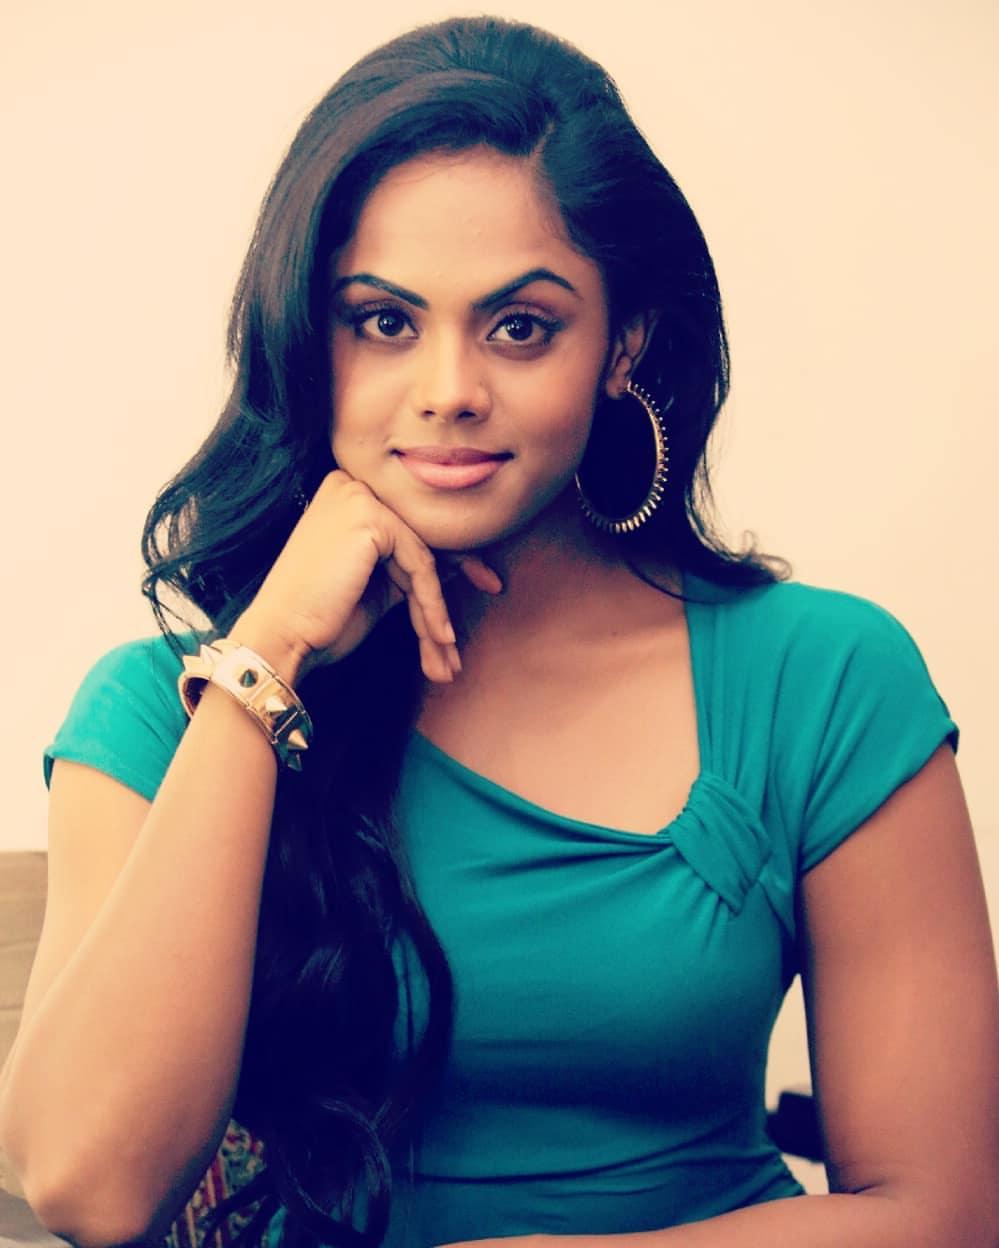 South indian actress Karthika nair looking very glamorous and beautiful  photo gallery Photos: HD Images, Pictures, Stills, First Look Posters of  South indian actress Karthika nair looking very glamorous and beautiful  photo